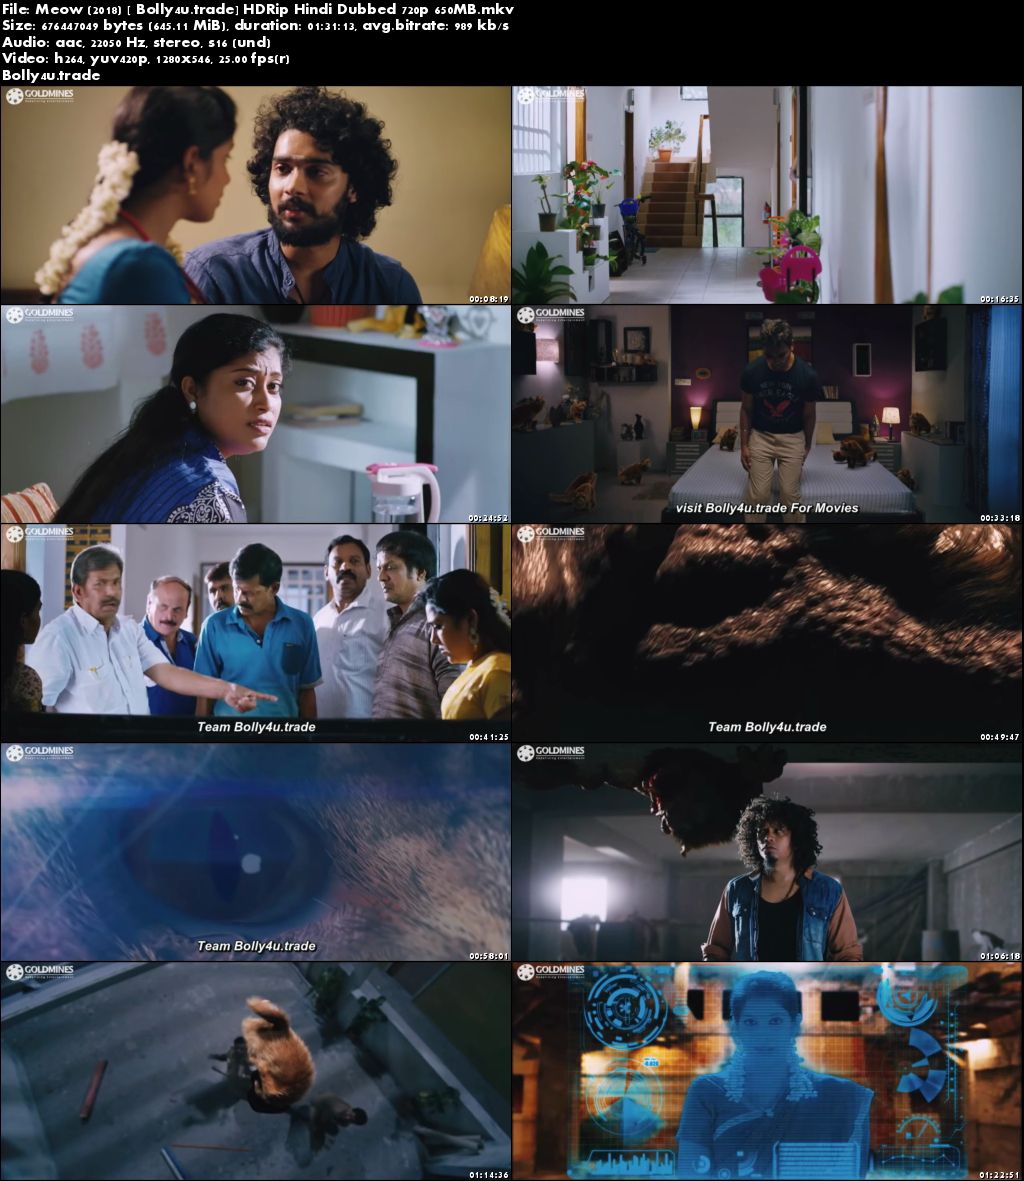  Meow 2018 HDRip 300Mb Full Hindi Dubbed Movie Download 480p